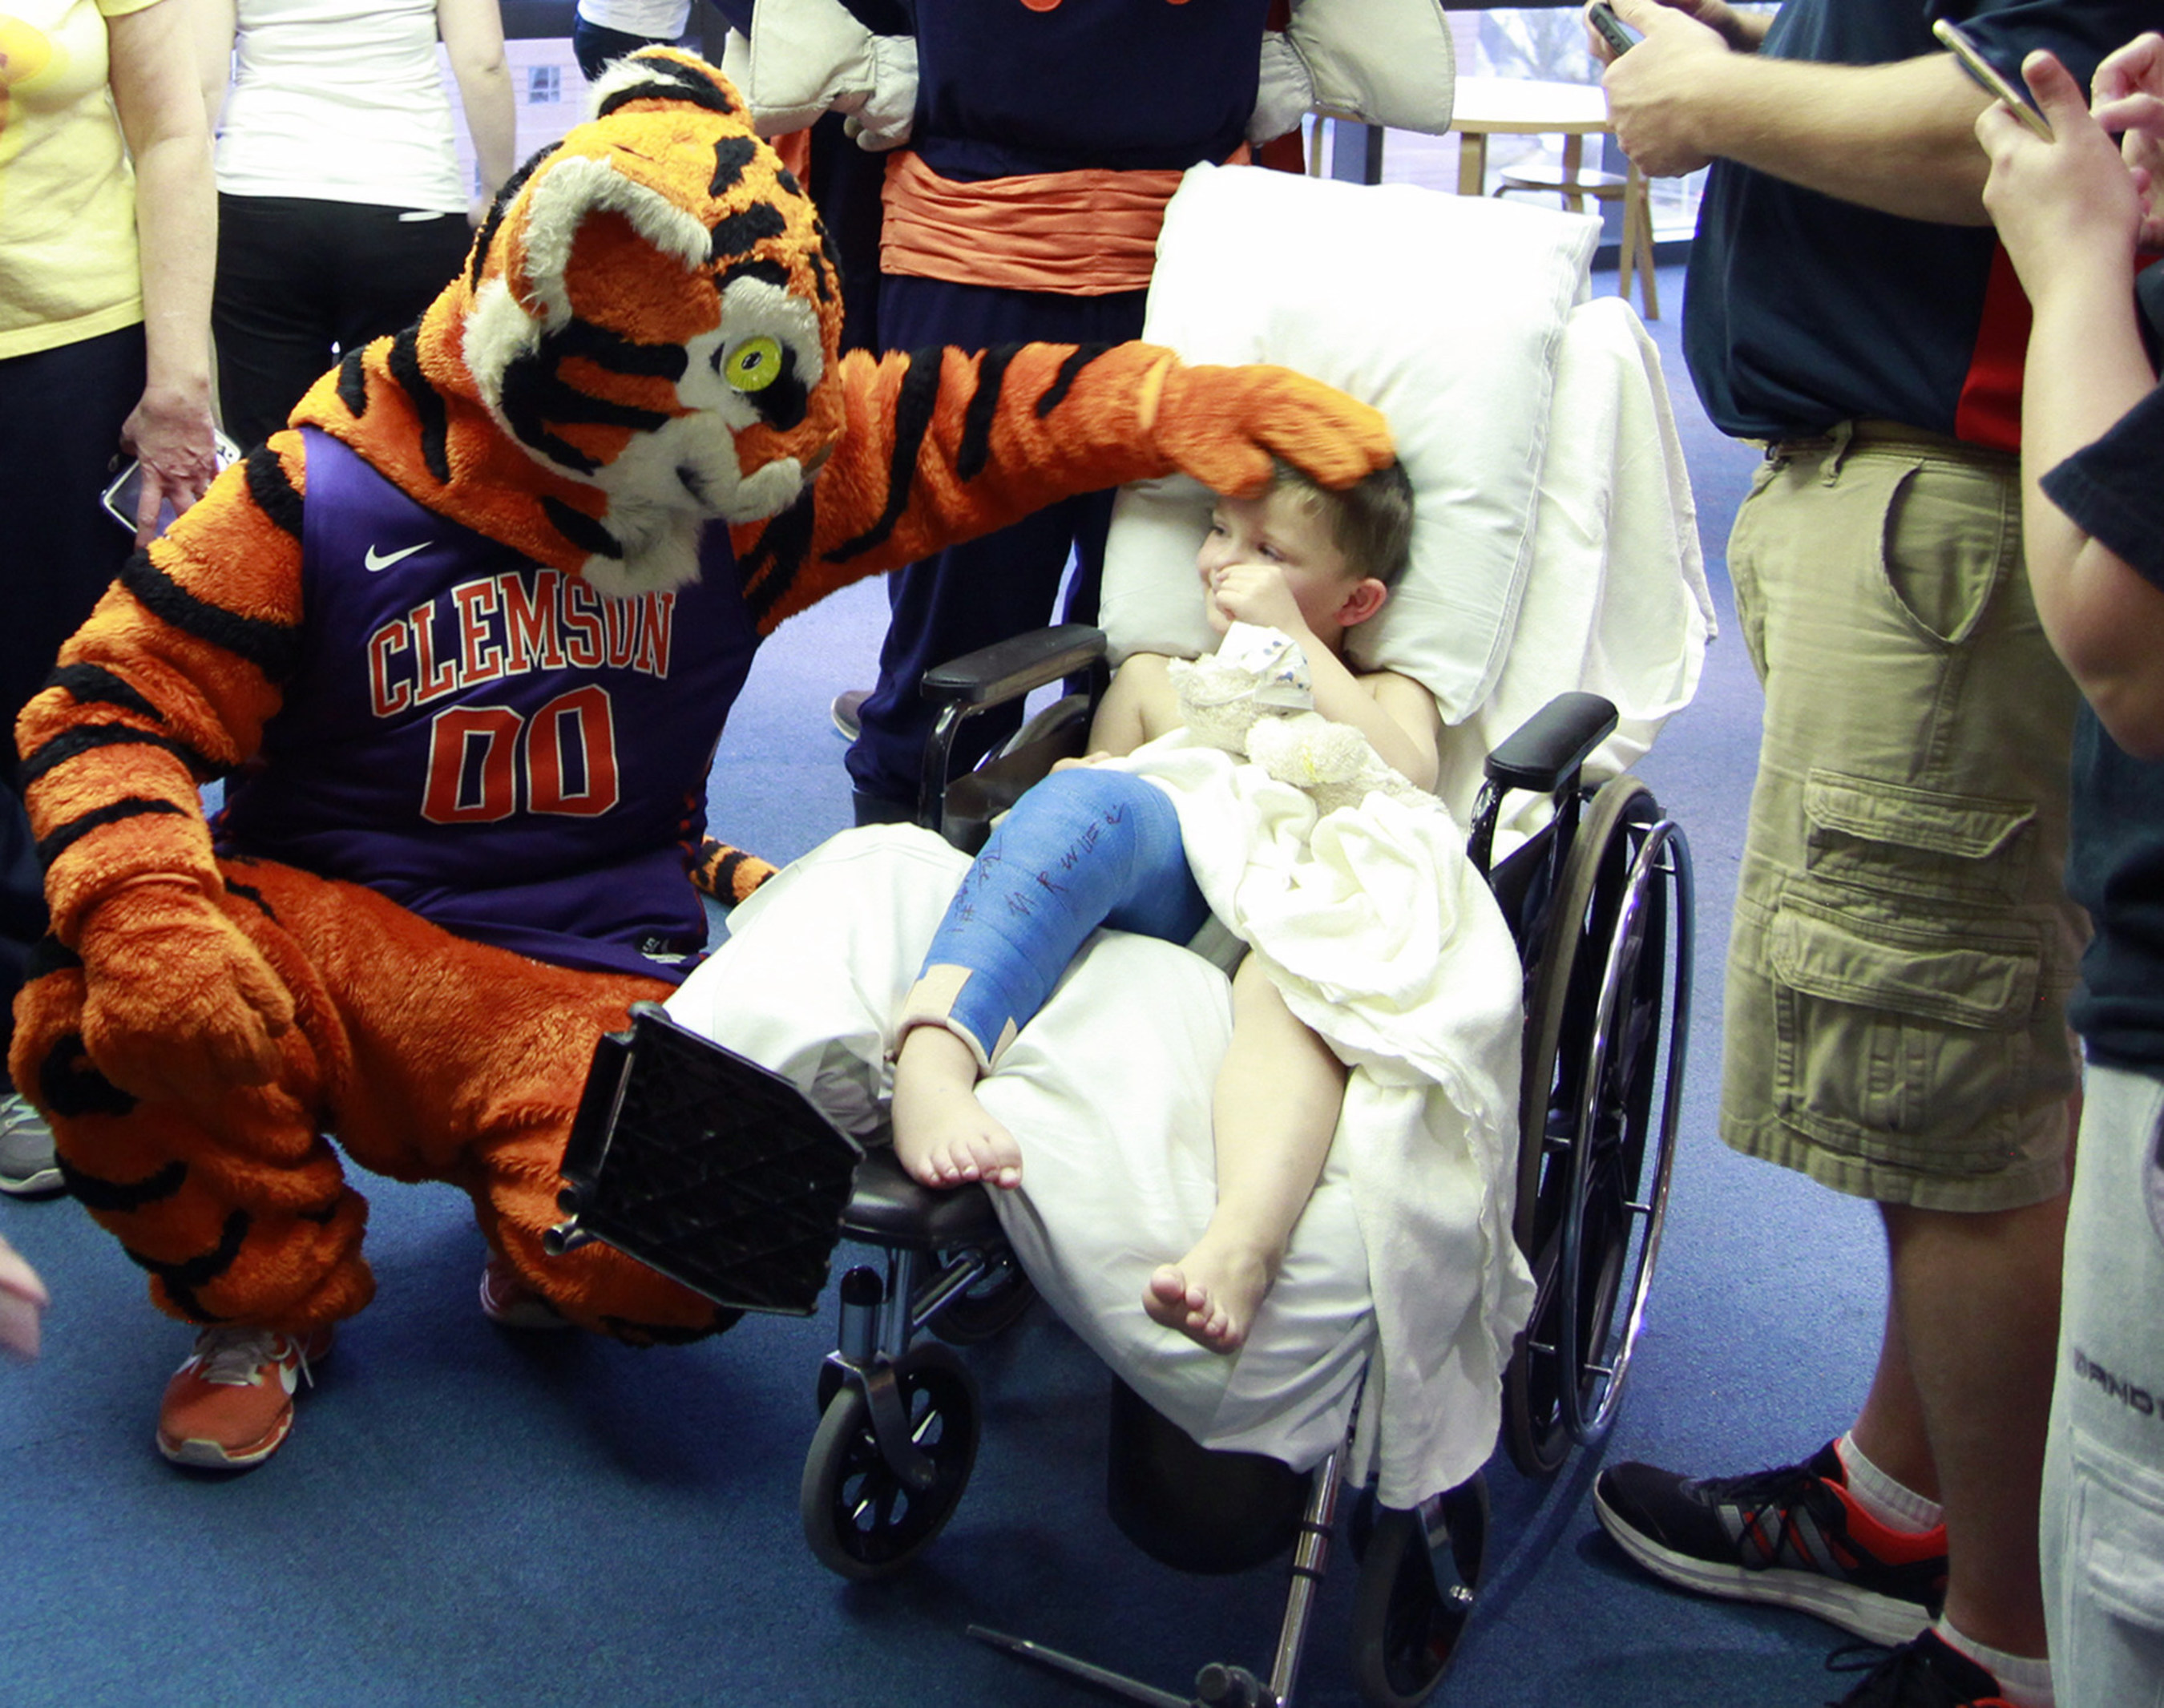 Four-year-old Kyler Rippey smiles as the Clemson Tiger wishes him well. The mascots of the Atlantic Coast Conference paid a visit to Brenner Children's Hospital as part of an outreach initiative for the 2015 ACC Men's Basketball Tournament.